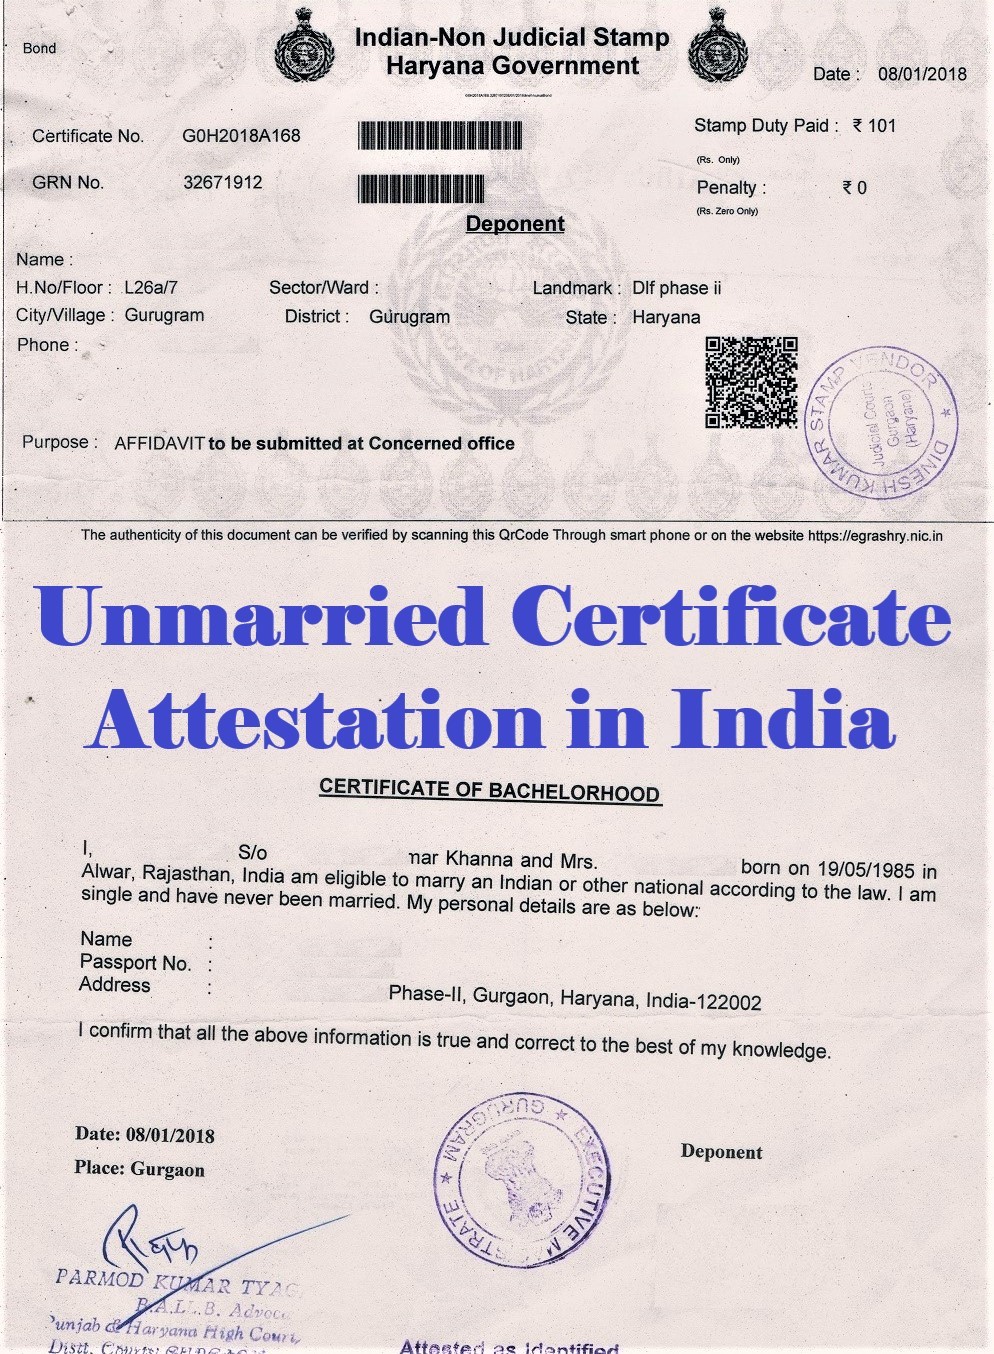 Unmarried Certificate Attestation from Nicaragua Embassy